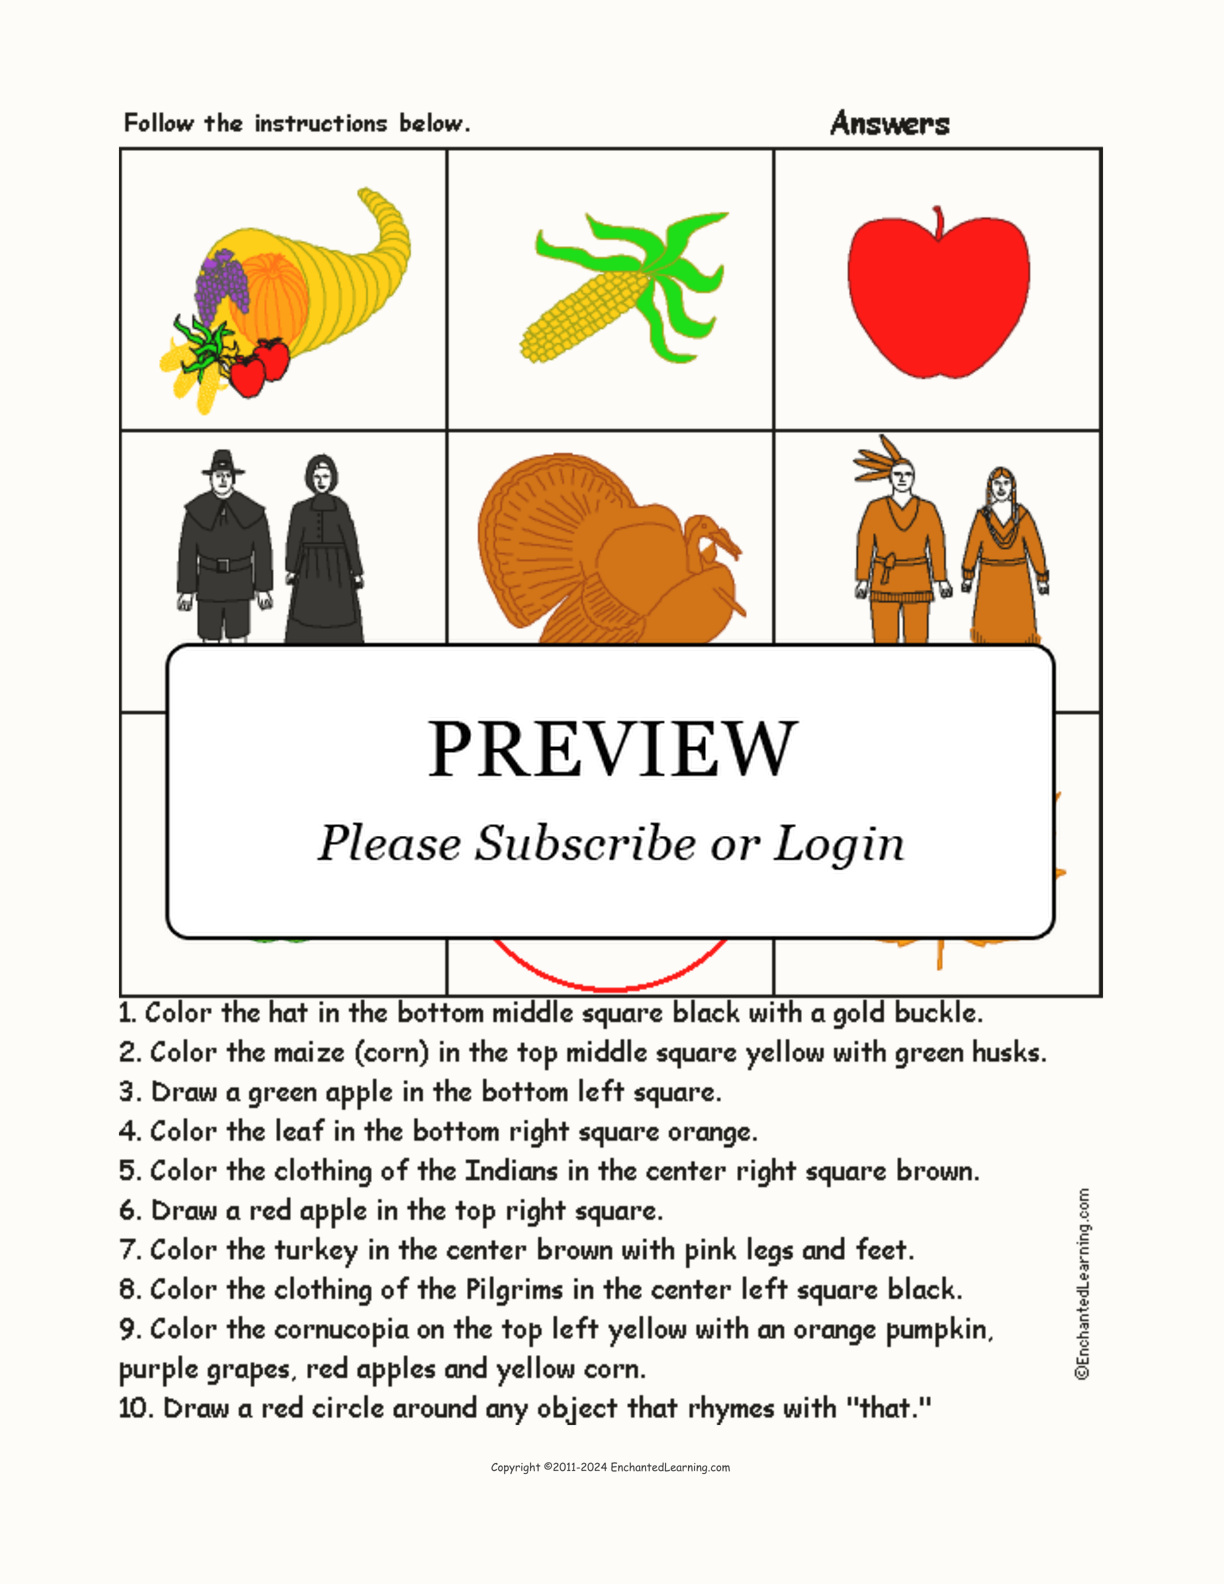 Thanksgiving Grid - Follow the Instructions interactive worksheet page 2